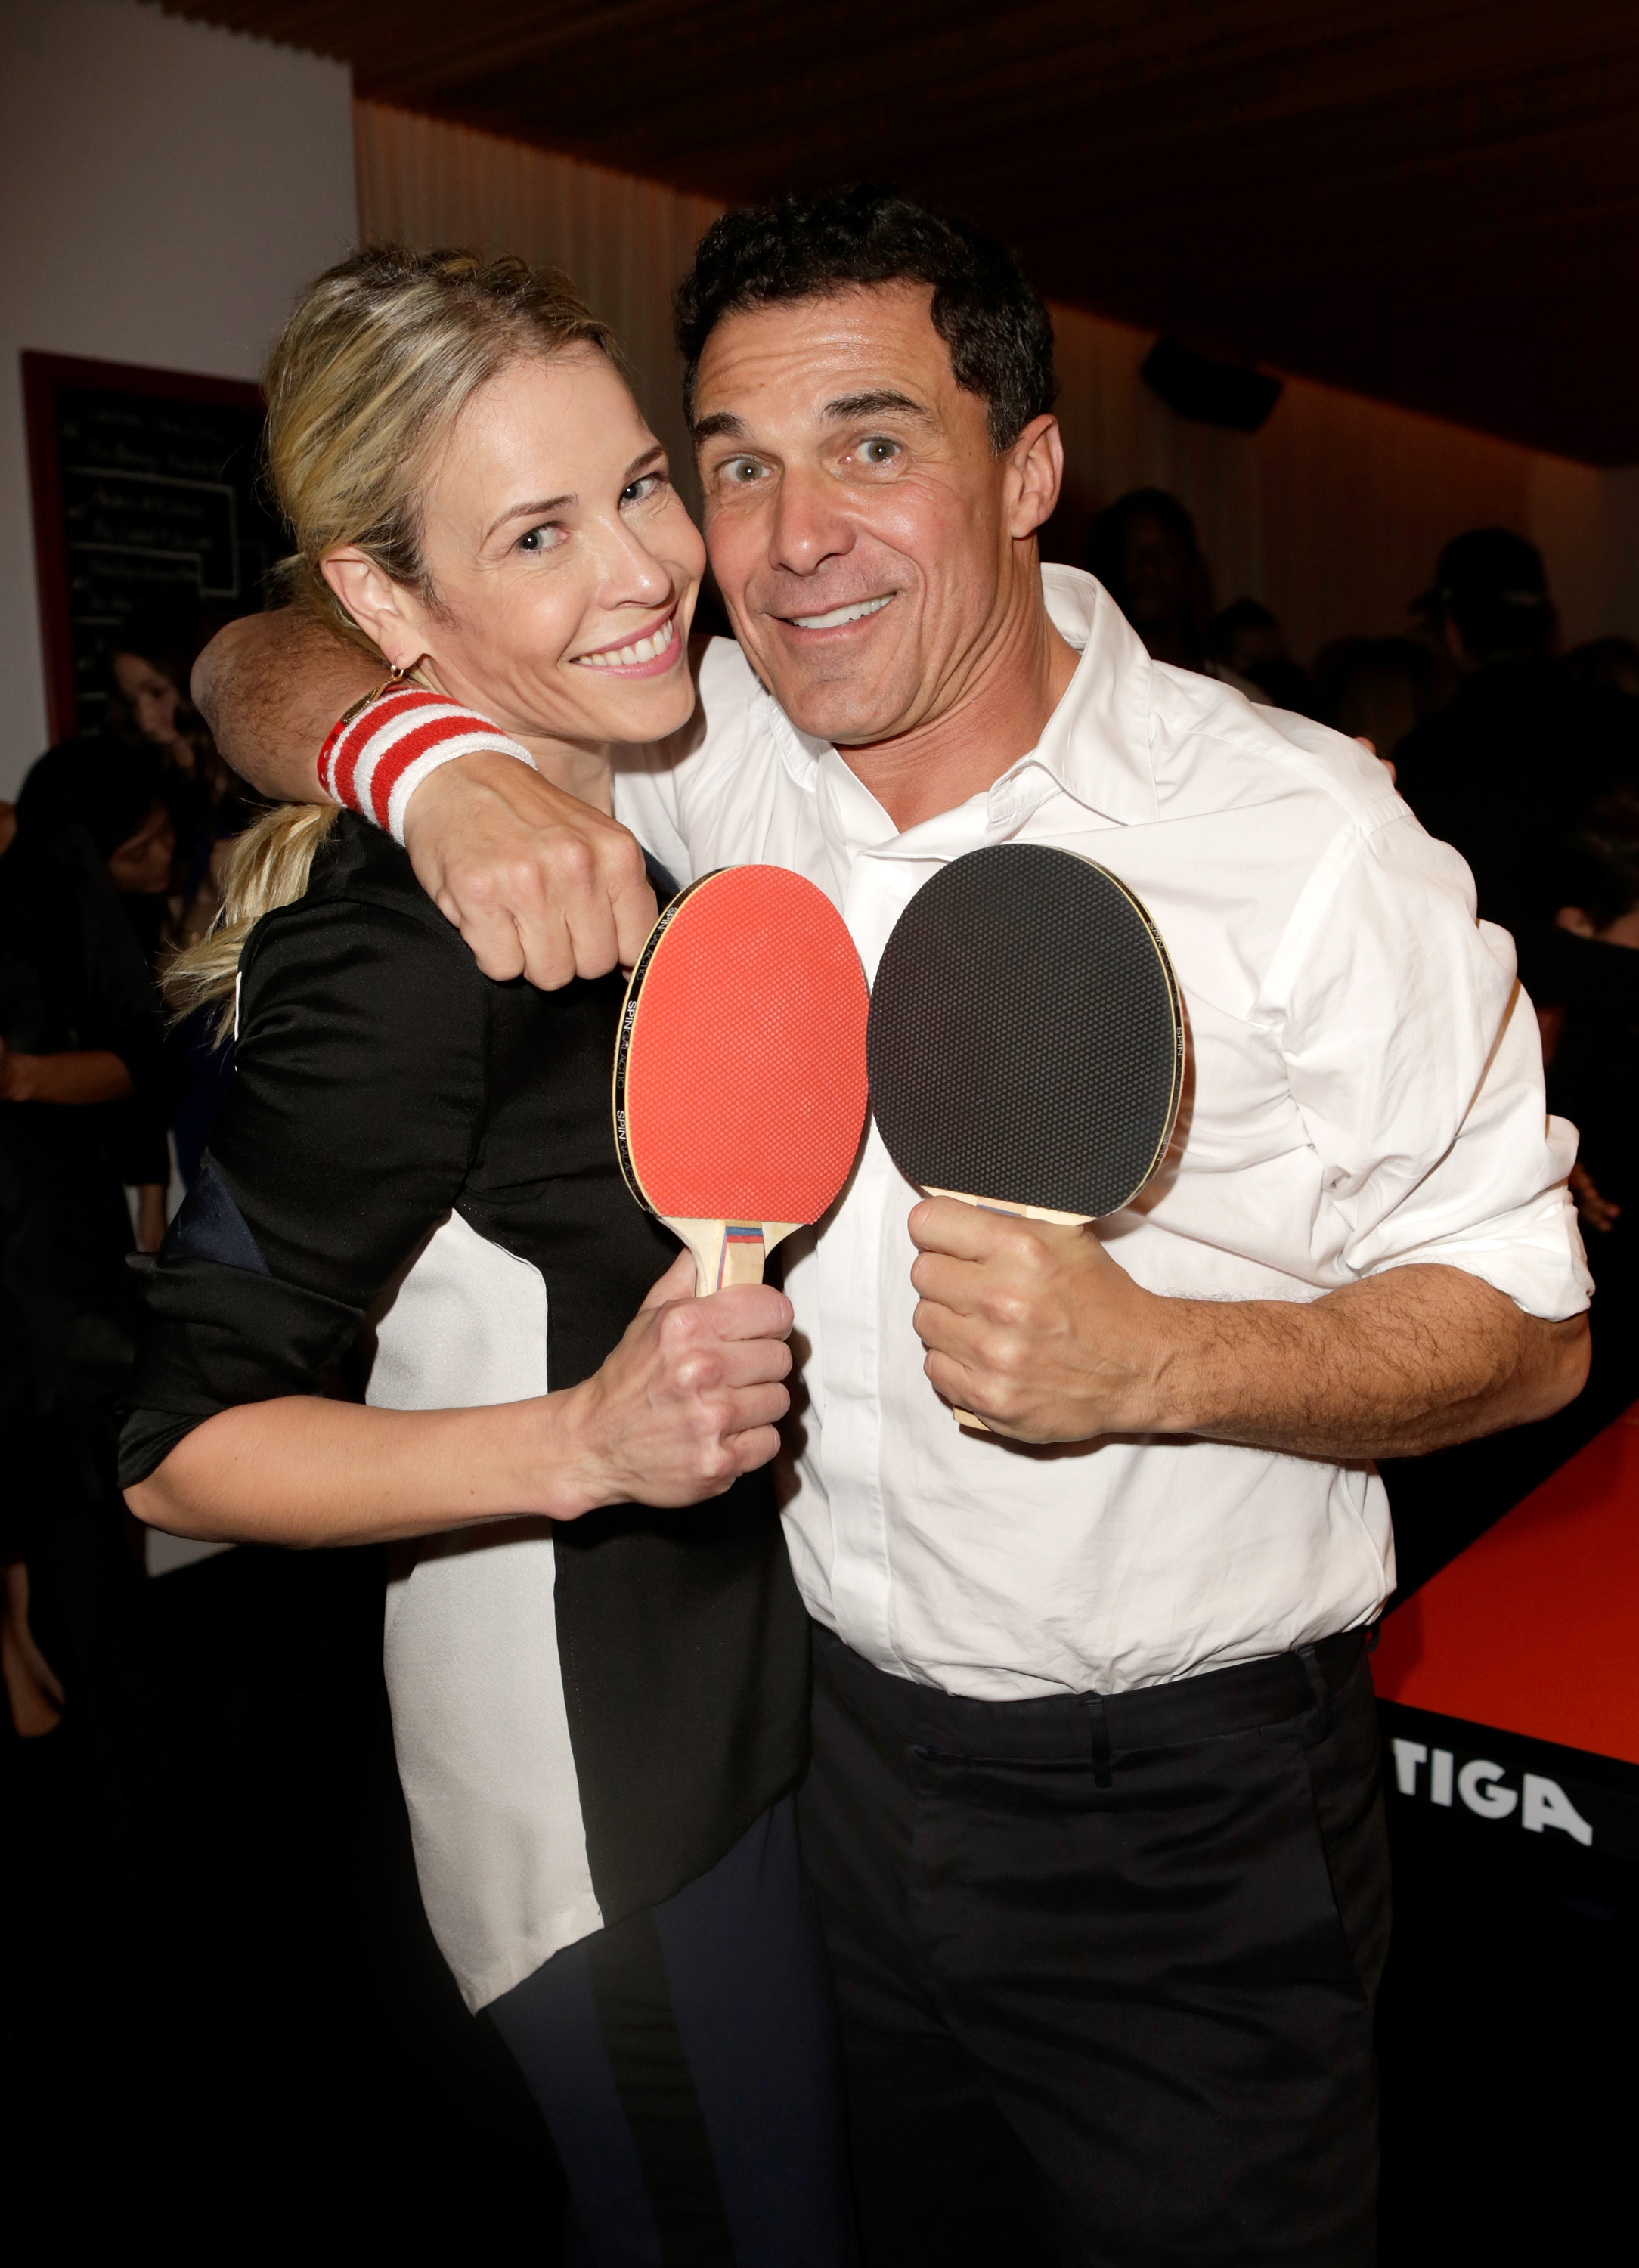 LOS ANGELES, CA - DECEMBER 11:  TV personality Chelsea Handler (L) and Andre Balazs attend SPiN Standard Ping Pong Social Club grand opening hosted by Susan Sarandon and Andre Balazs at The Standard, Downtown LA, on December 11, 2012 in Los Angeles, California.  (Photo by Jeff Vespa/WireImage)